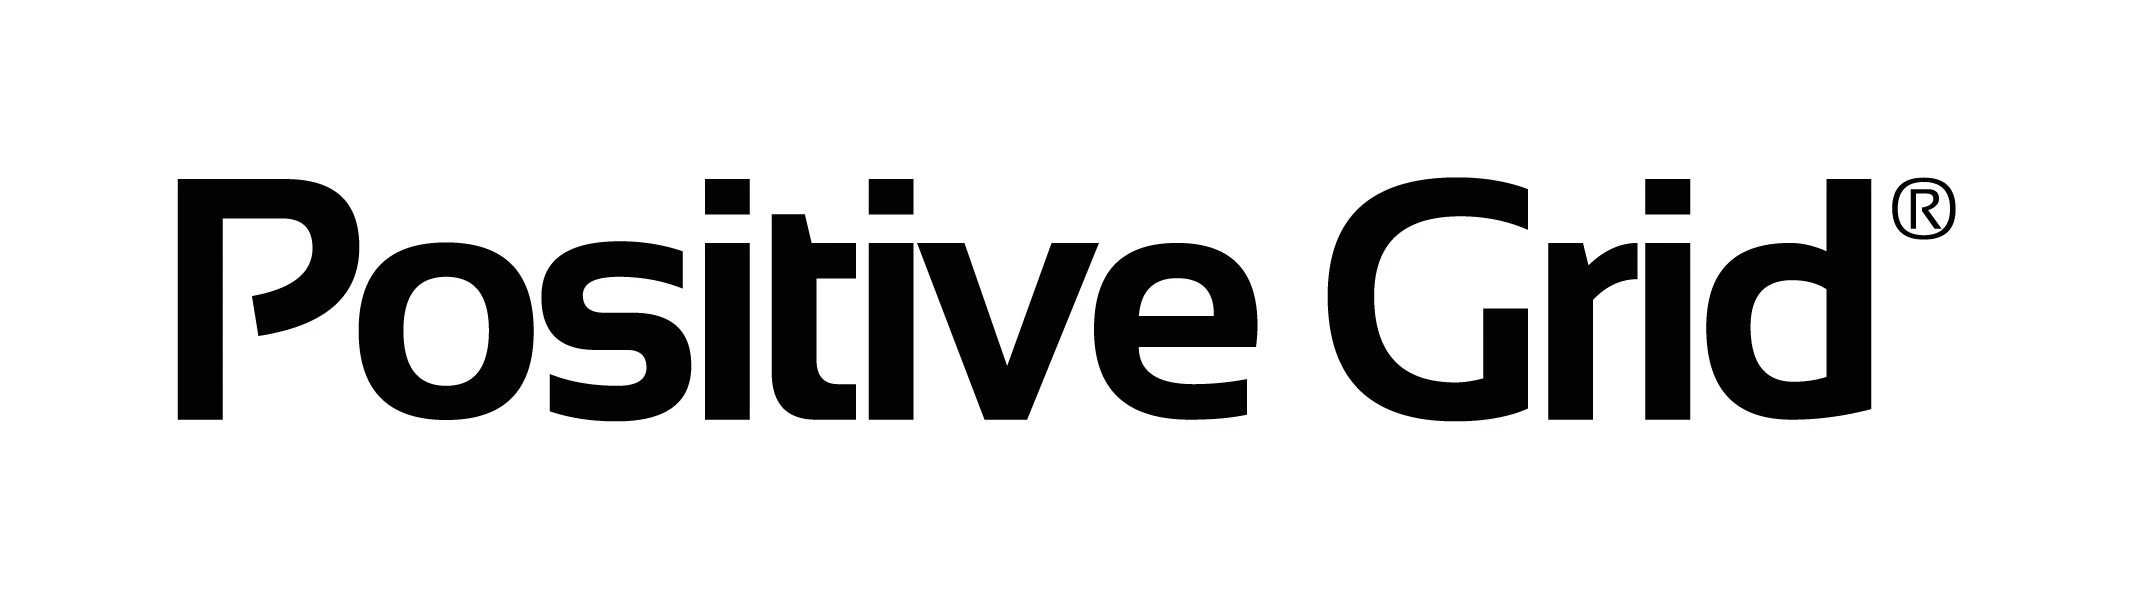 Positive Grid Promotiecode 